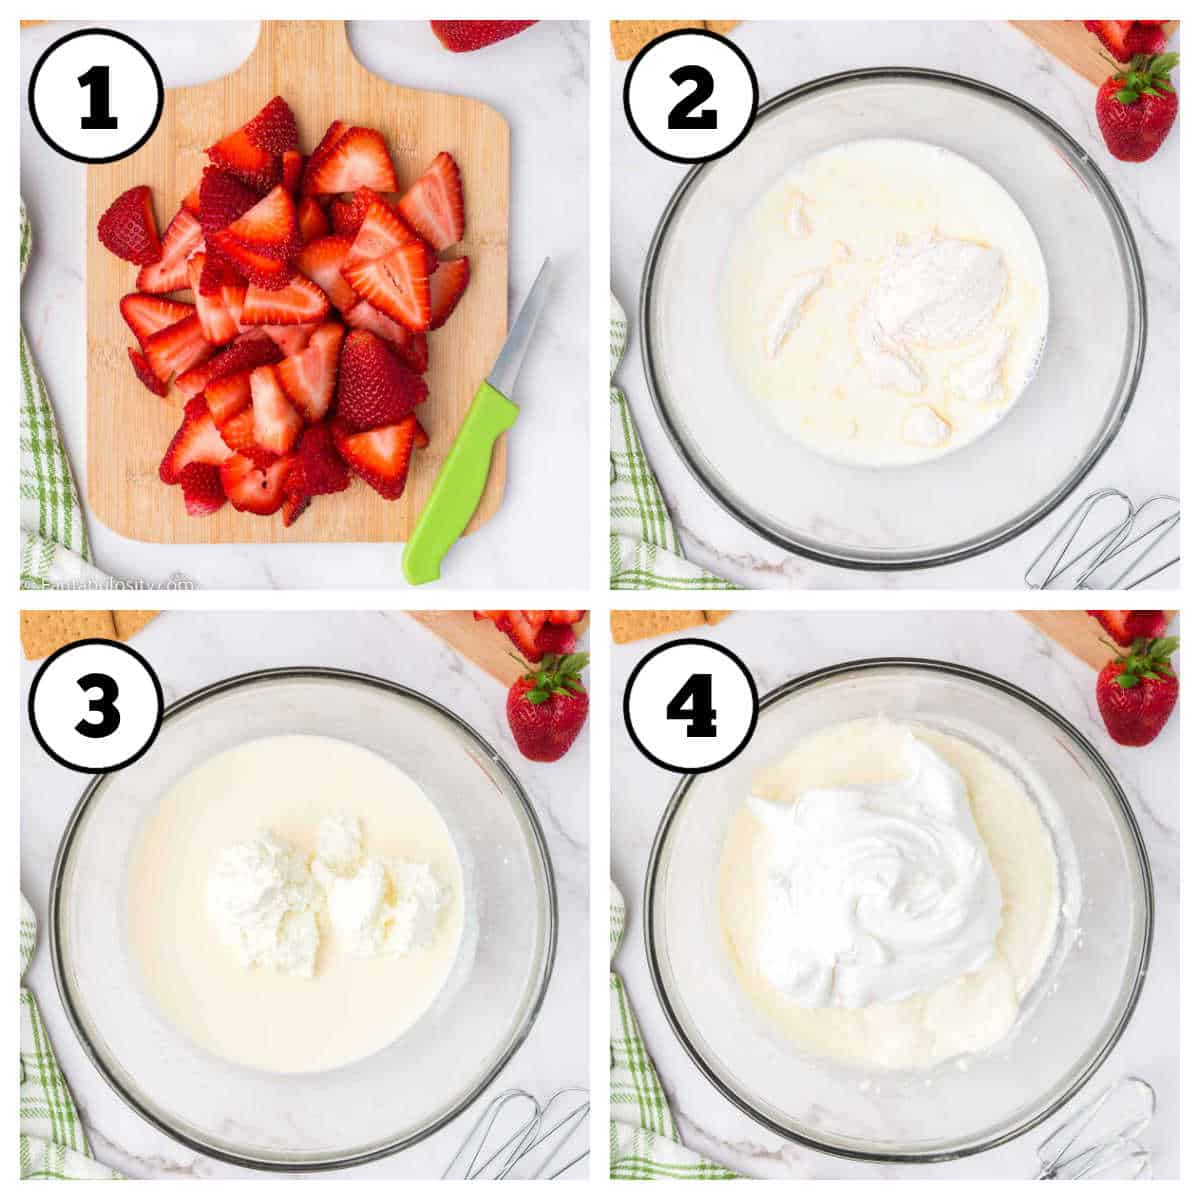 Steps 1-4 on how to make strawberry icebox cake.